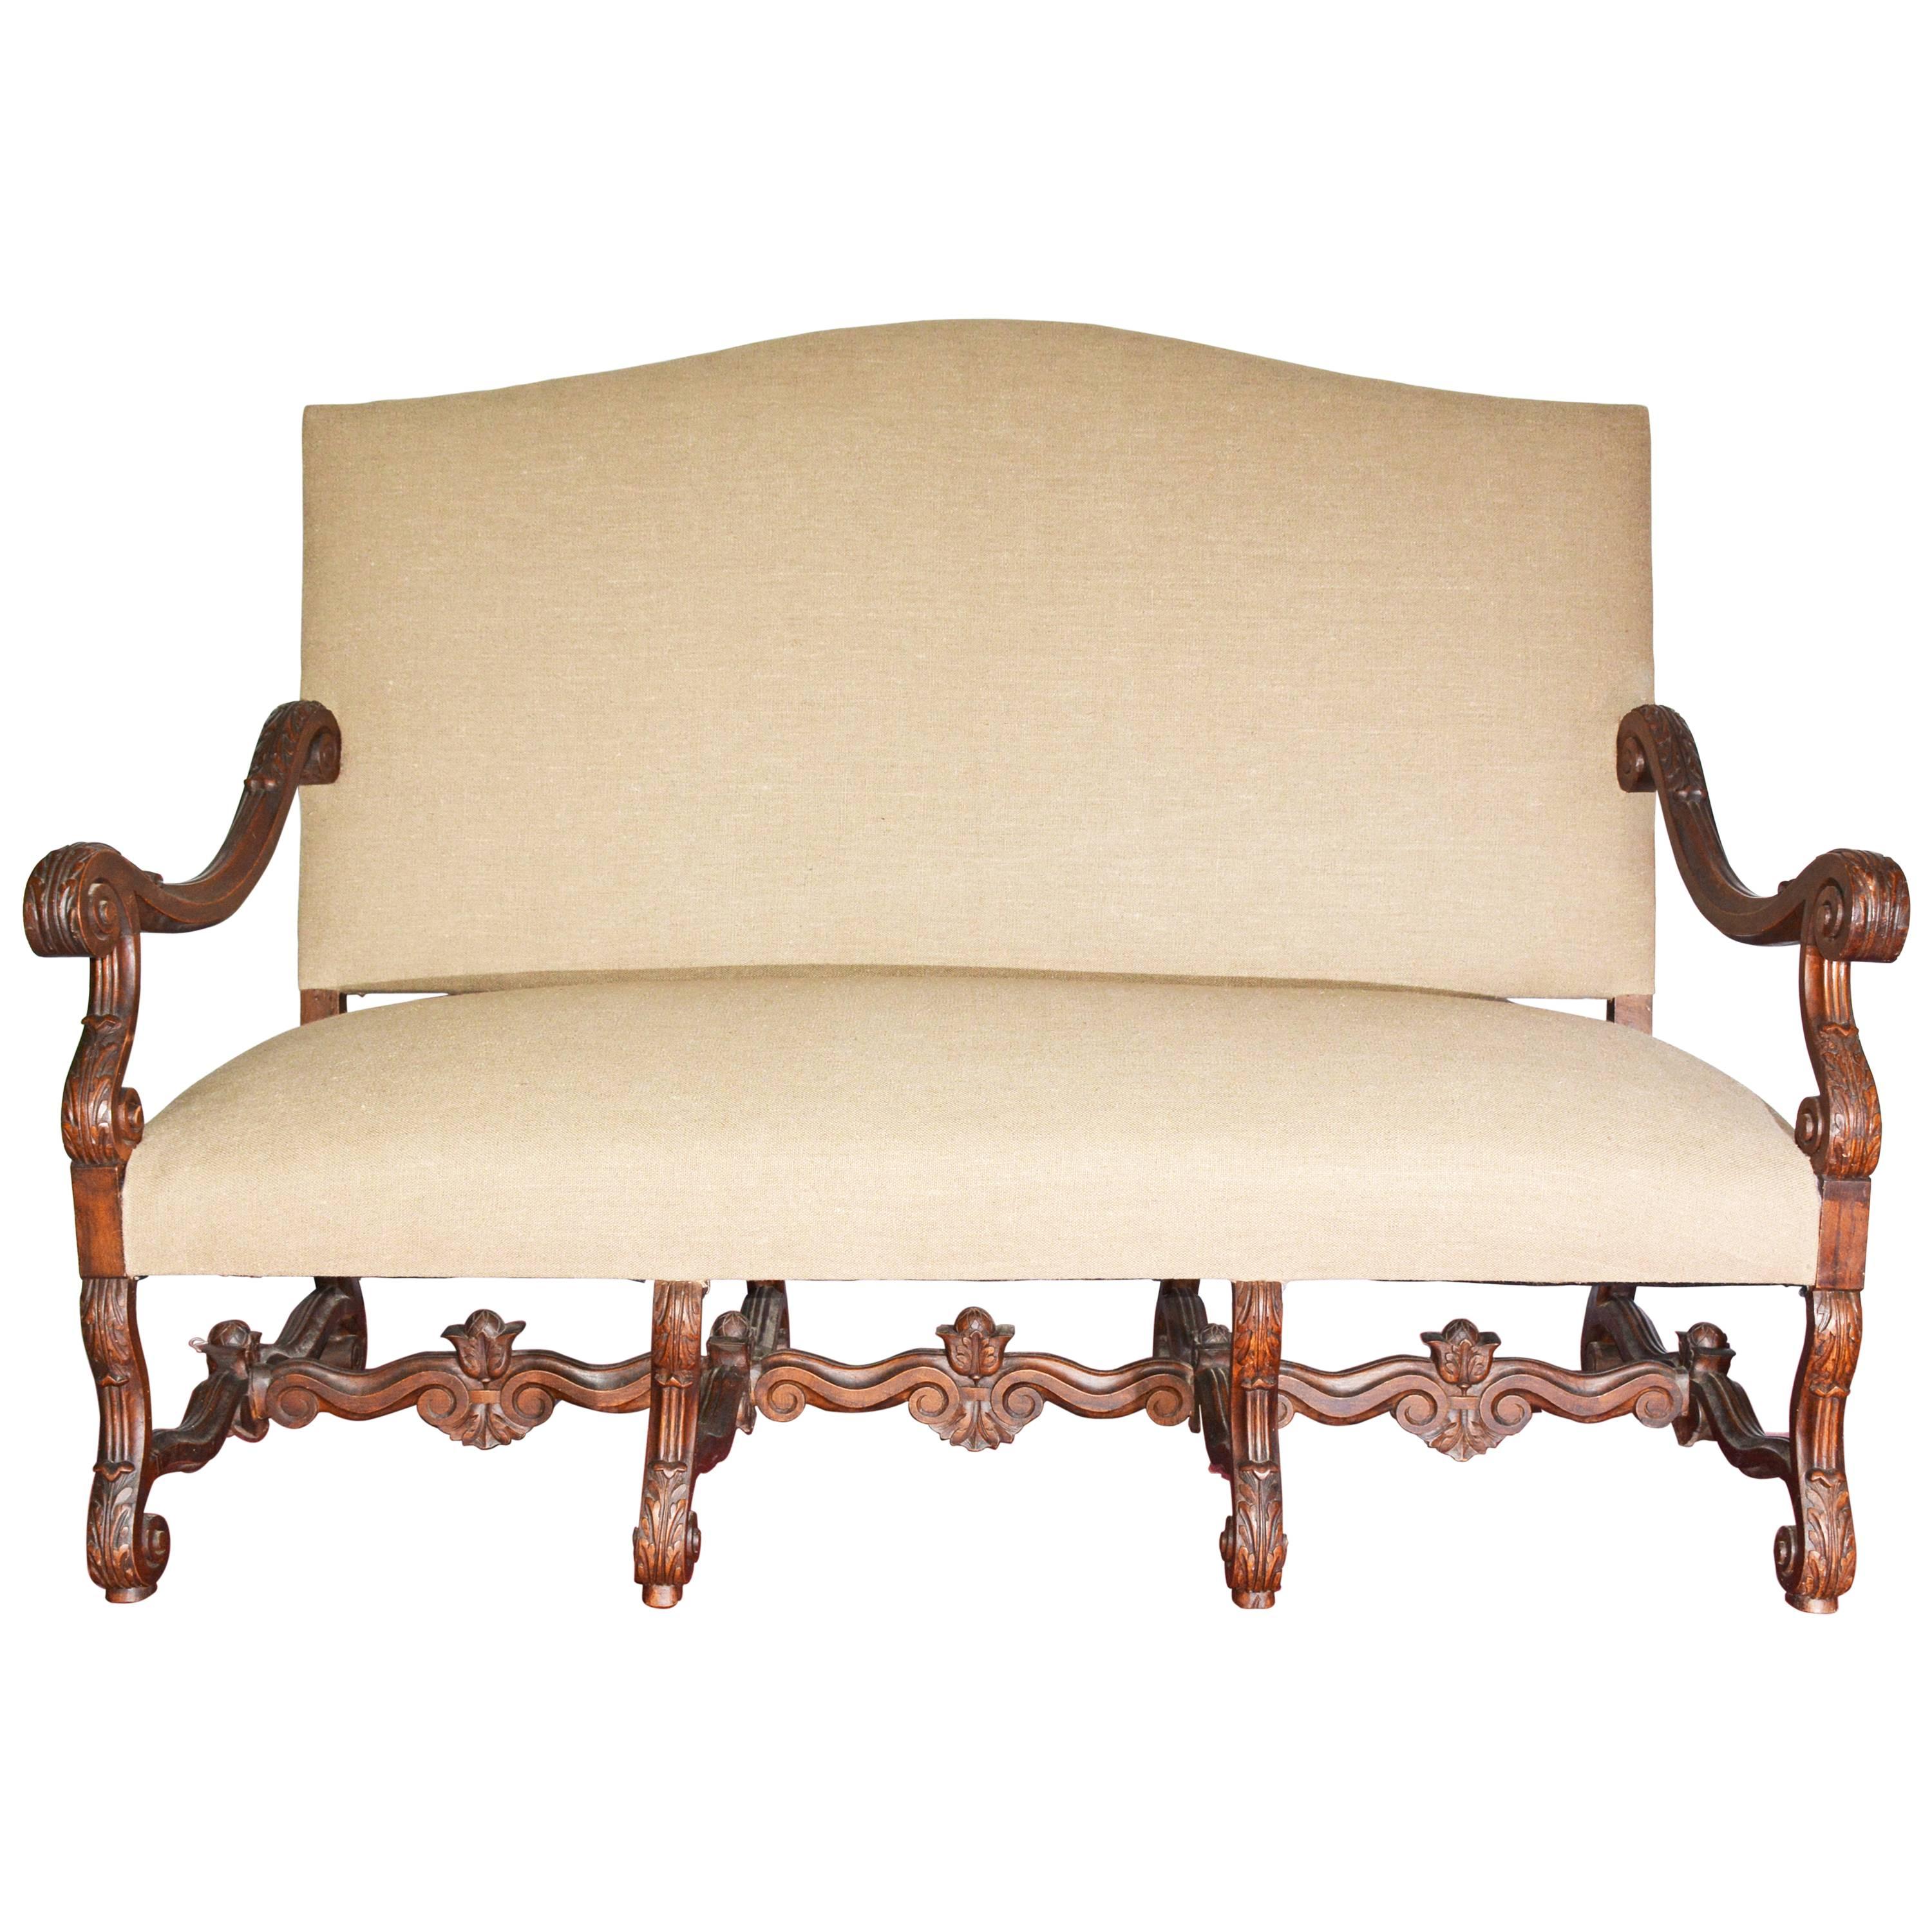 19th Century French Baroque Camelback Throne Settee For Sale